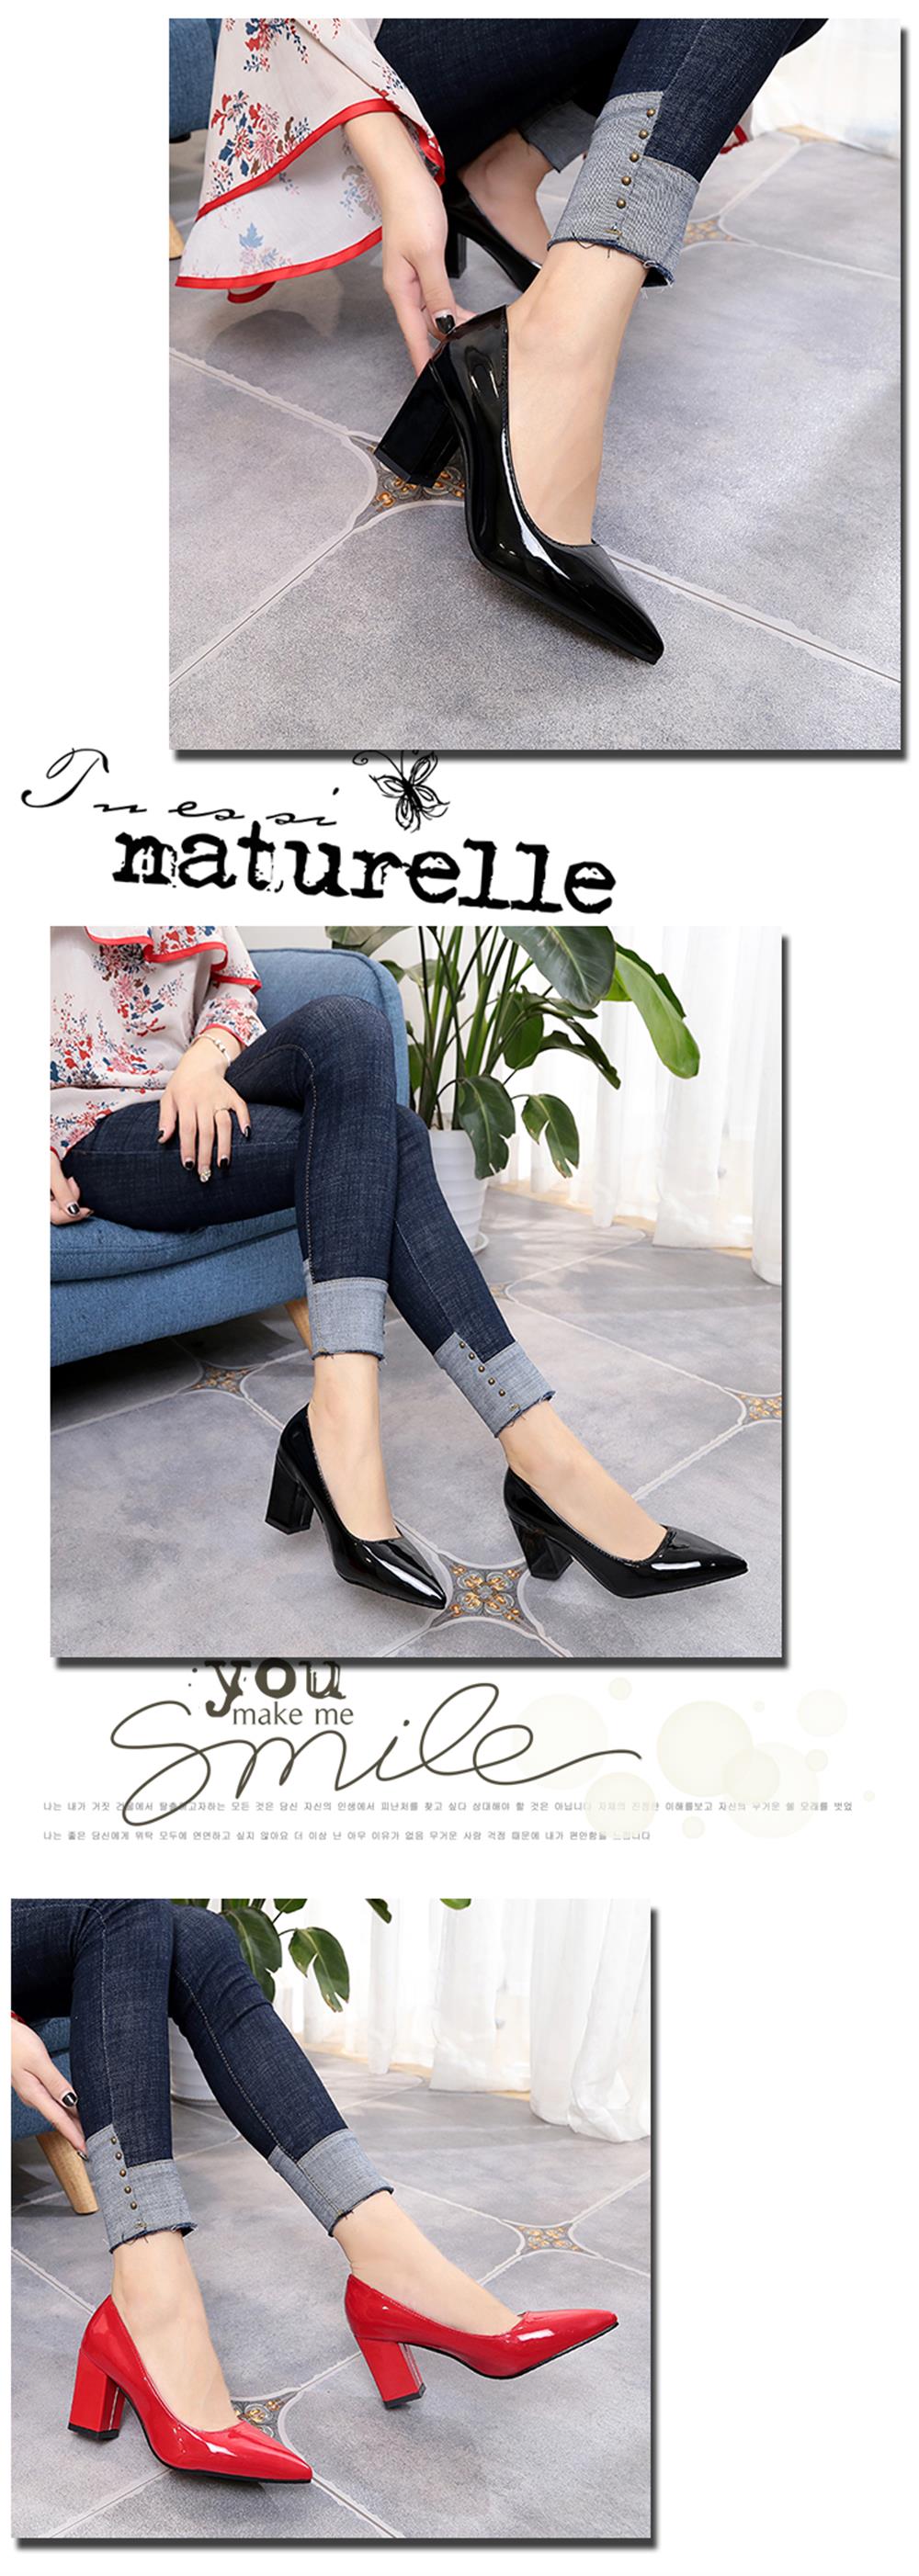 NJ-588 Nude Female Temperament High-heeled Feet Thick Shallow Muzzle Pointed Shoes Merchandiser